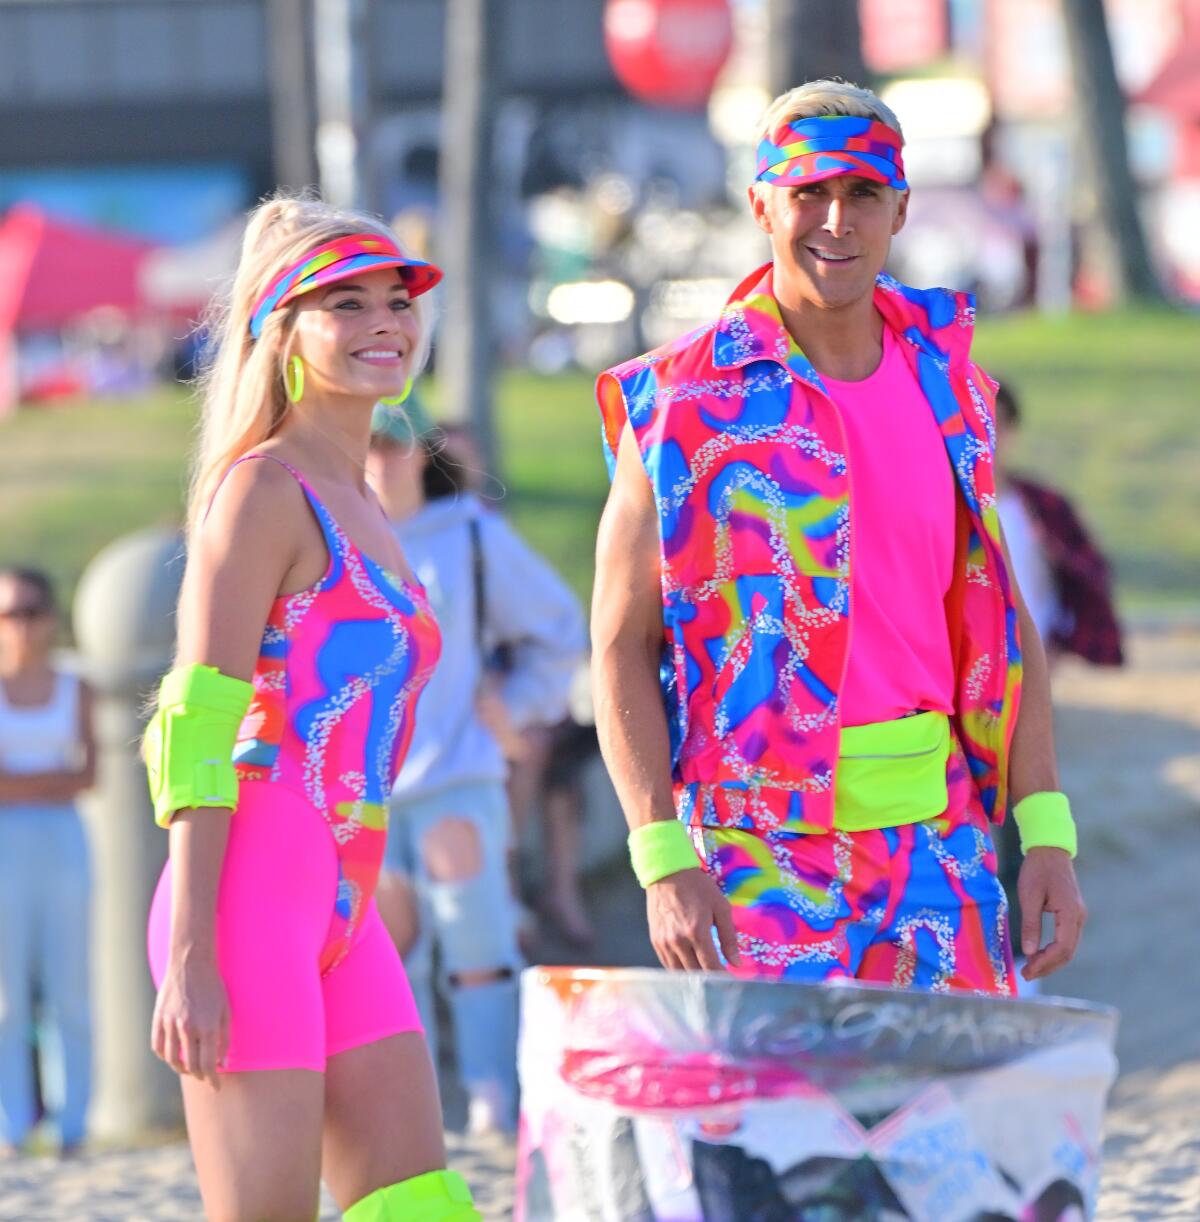 Margot Robbie and Ryan Gosling show off their Venice Beach looks on the set of "Barbie."